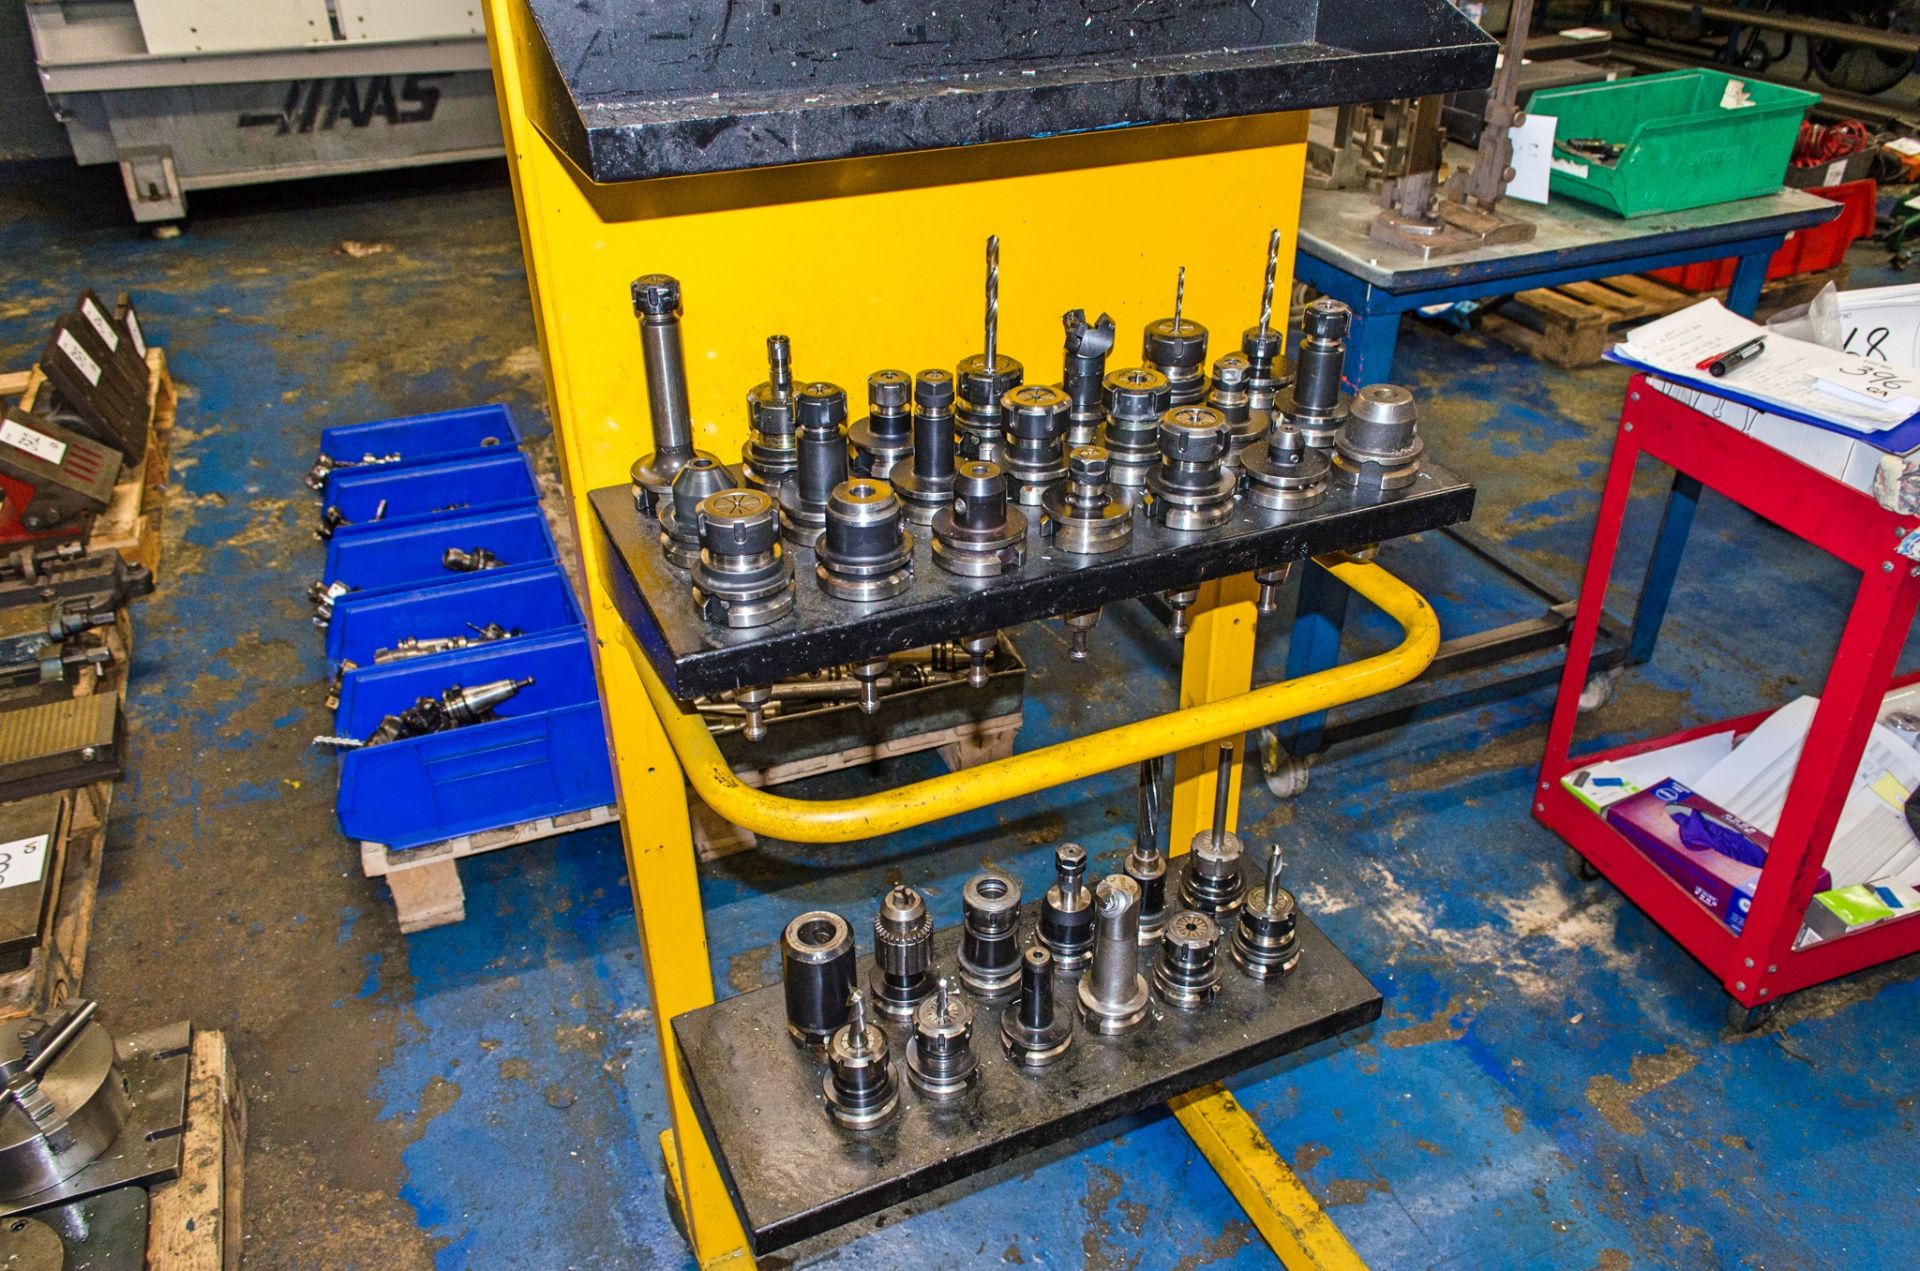 Steel mobile tooling rack c/w 33 BT40 tool holders and quantity of tooling - Image 2 of 2